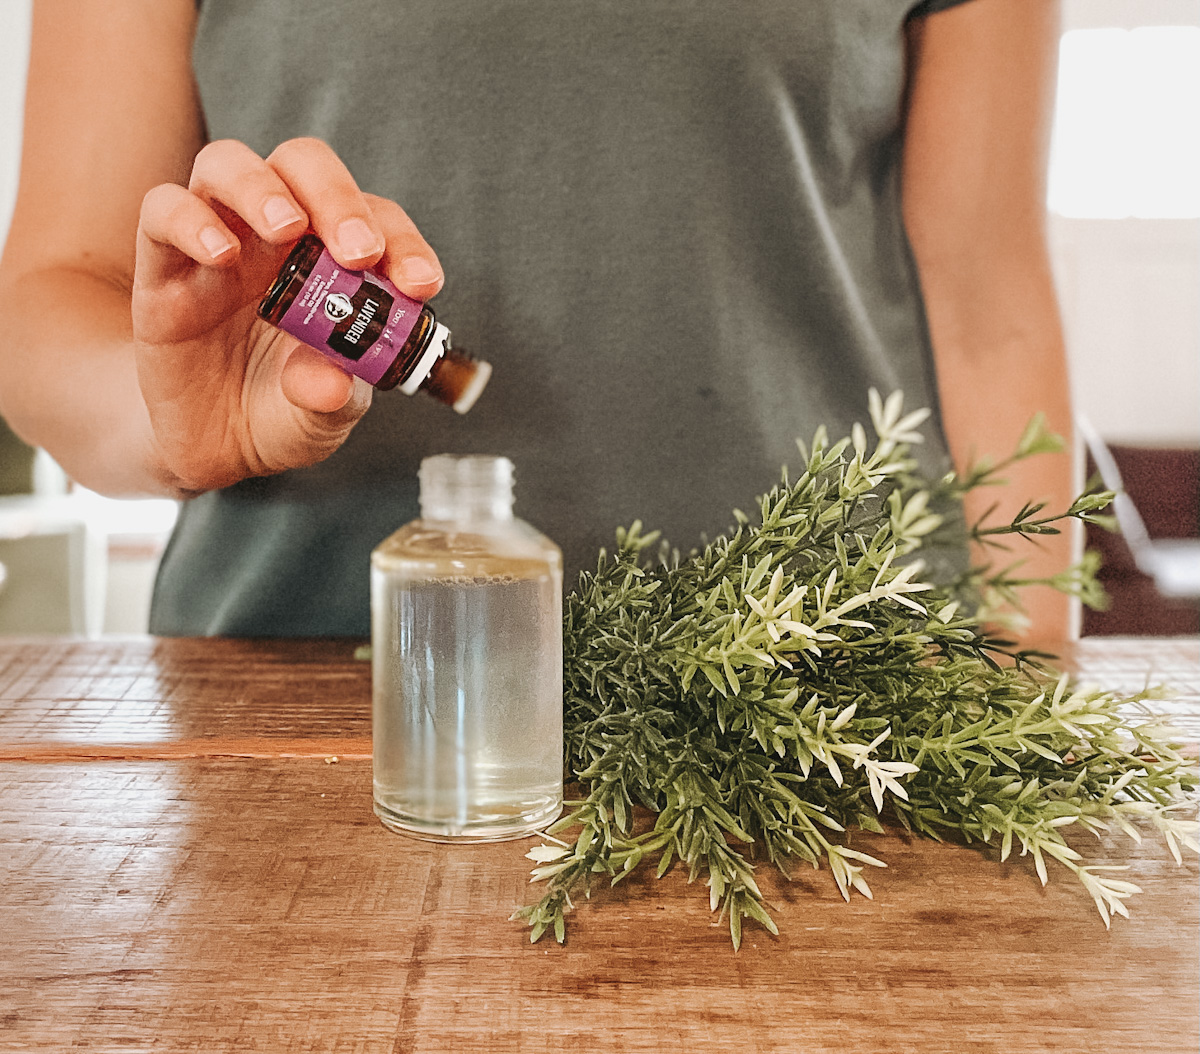 woman refilling diy hair growth spray bottle with lavender essential oil on a wooden countertop